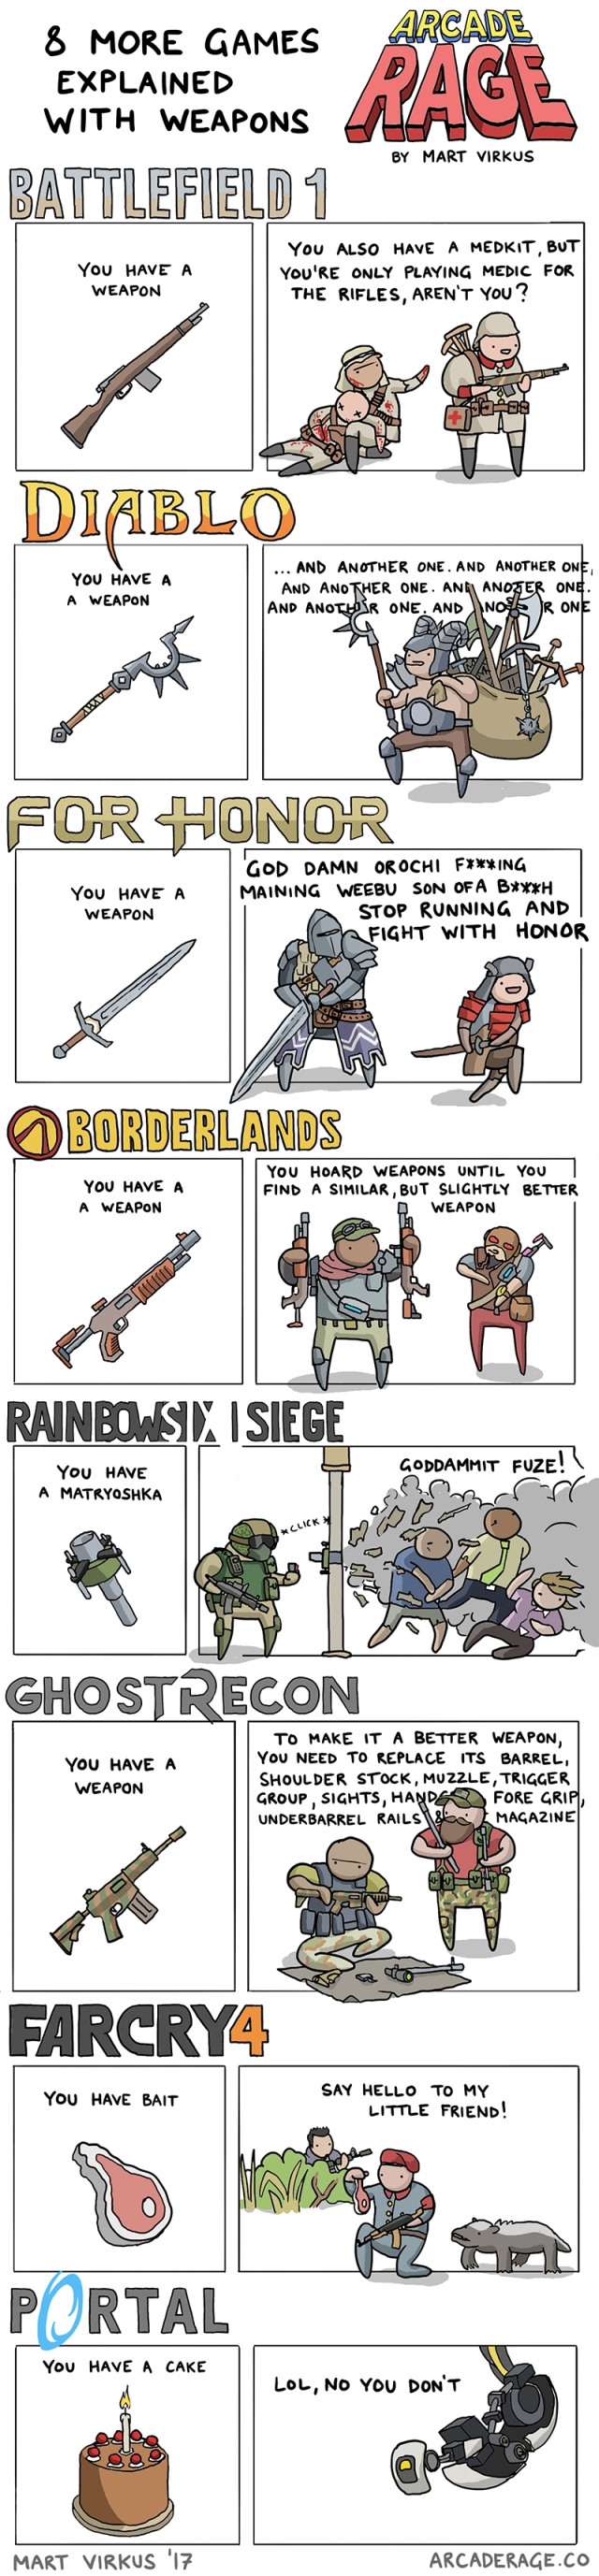 8 Games Explained With Weapons